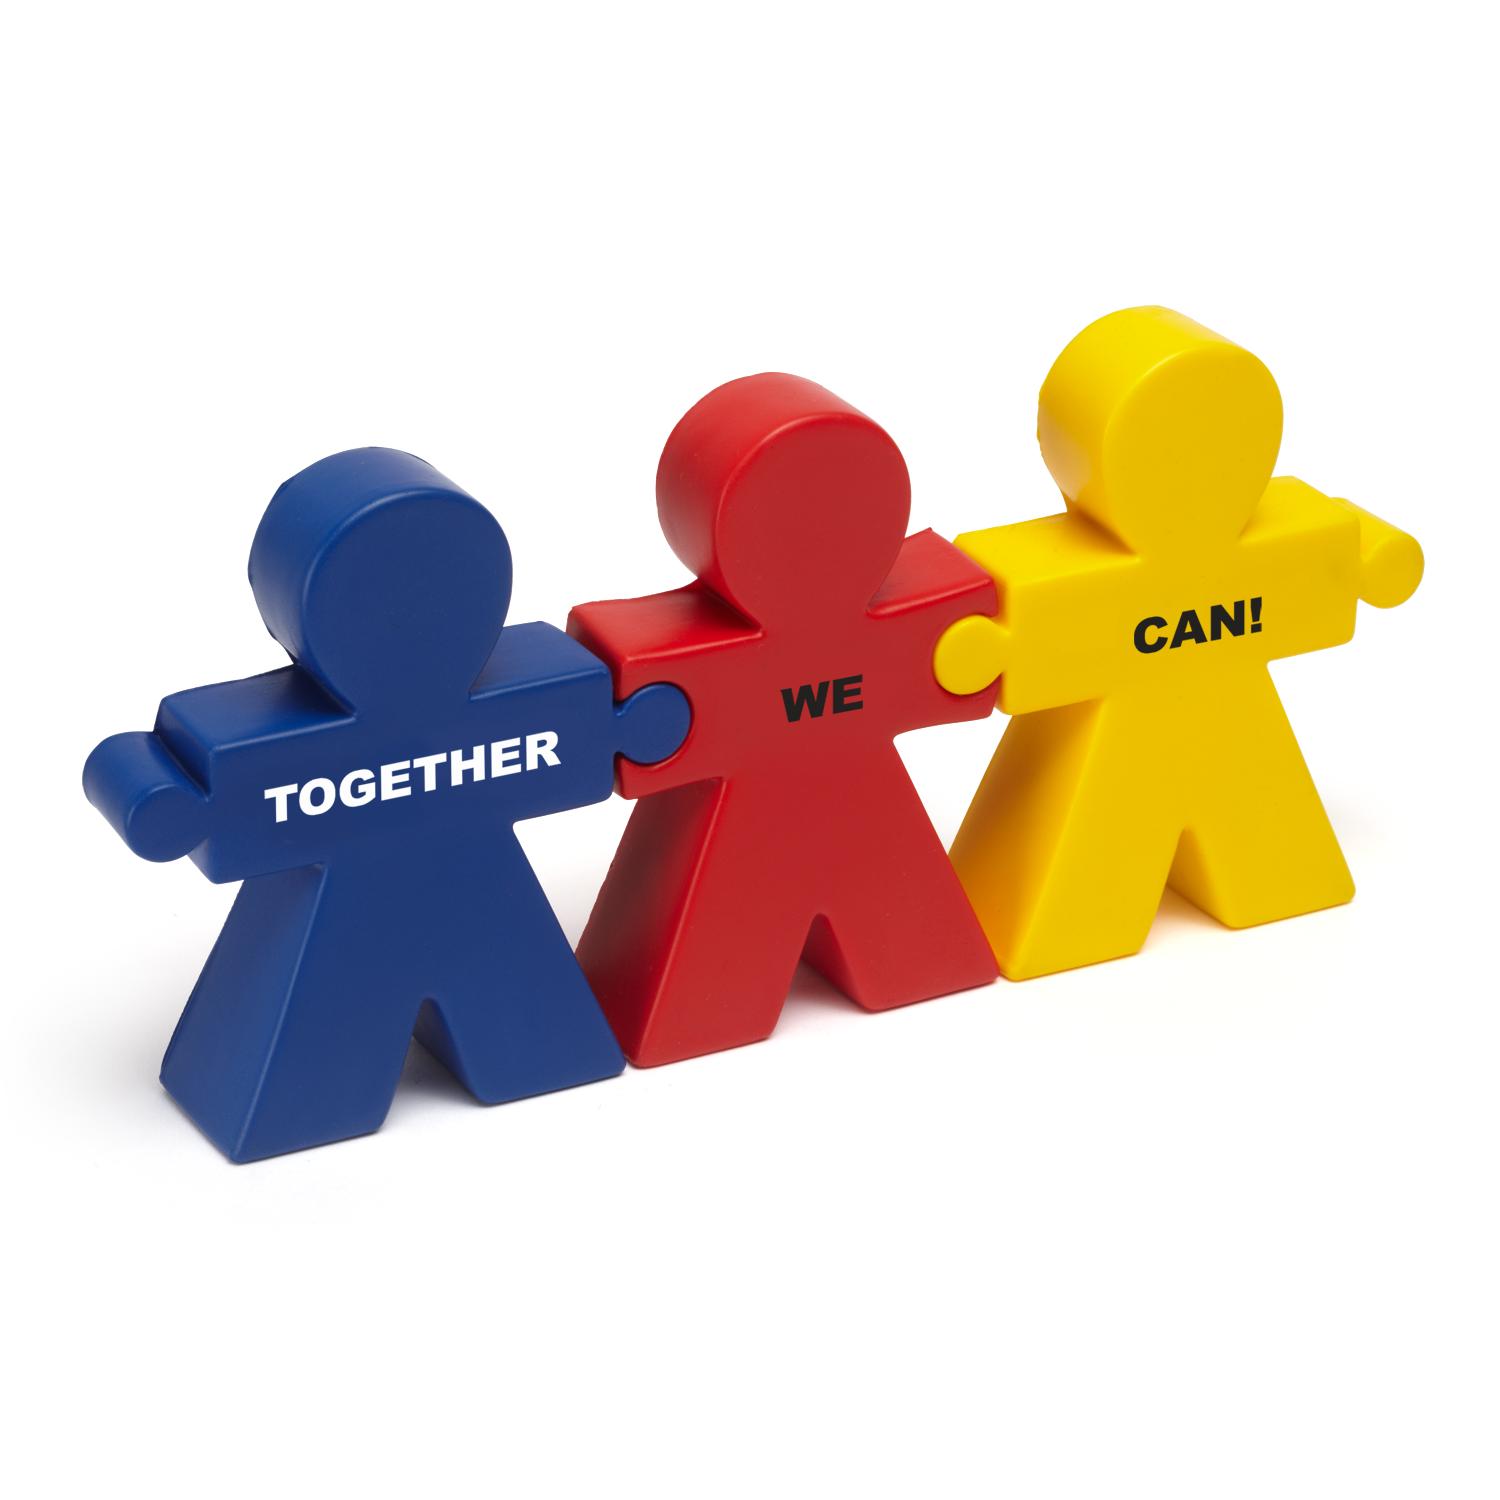 Free clipart images teamwork